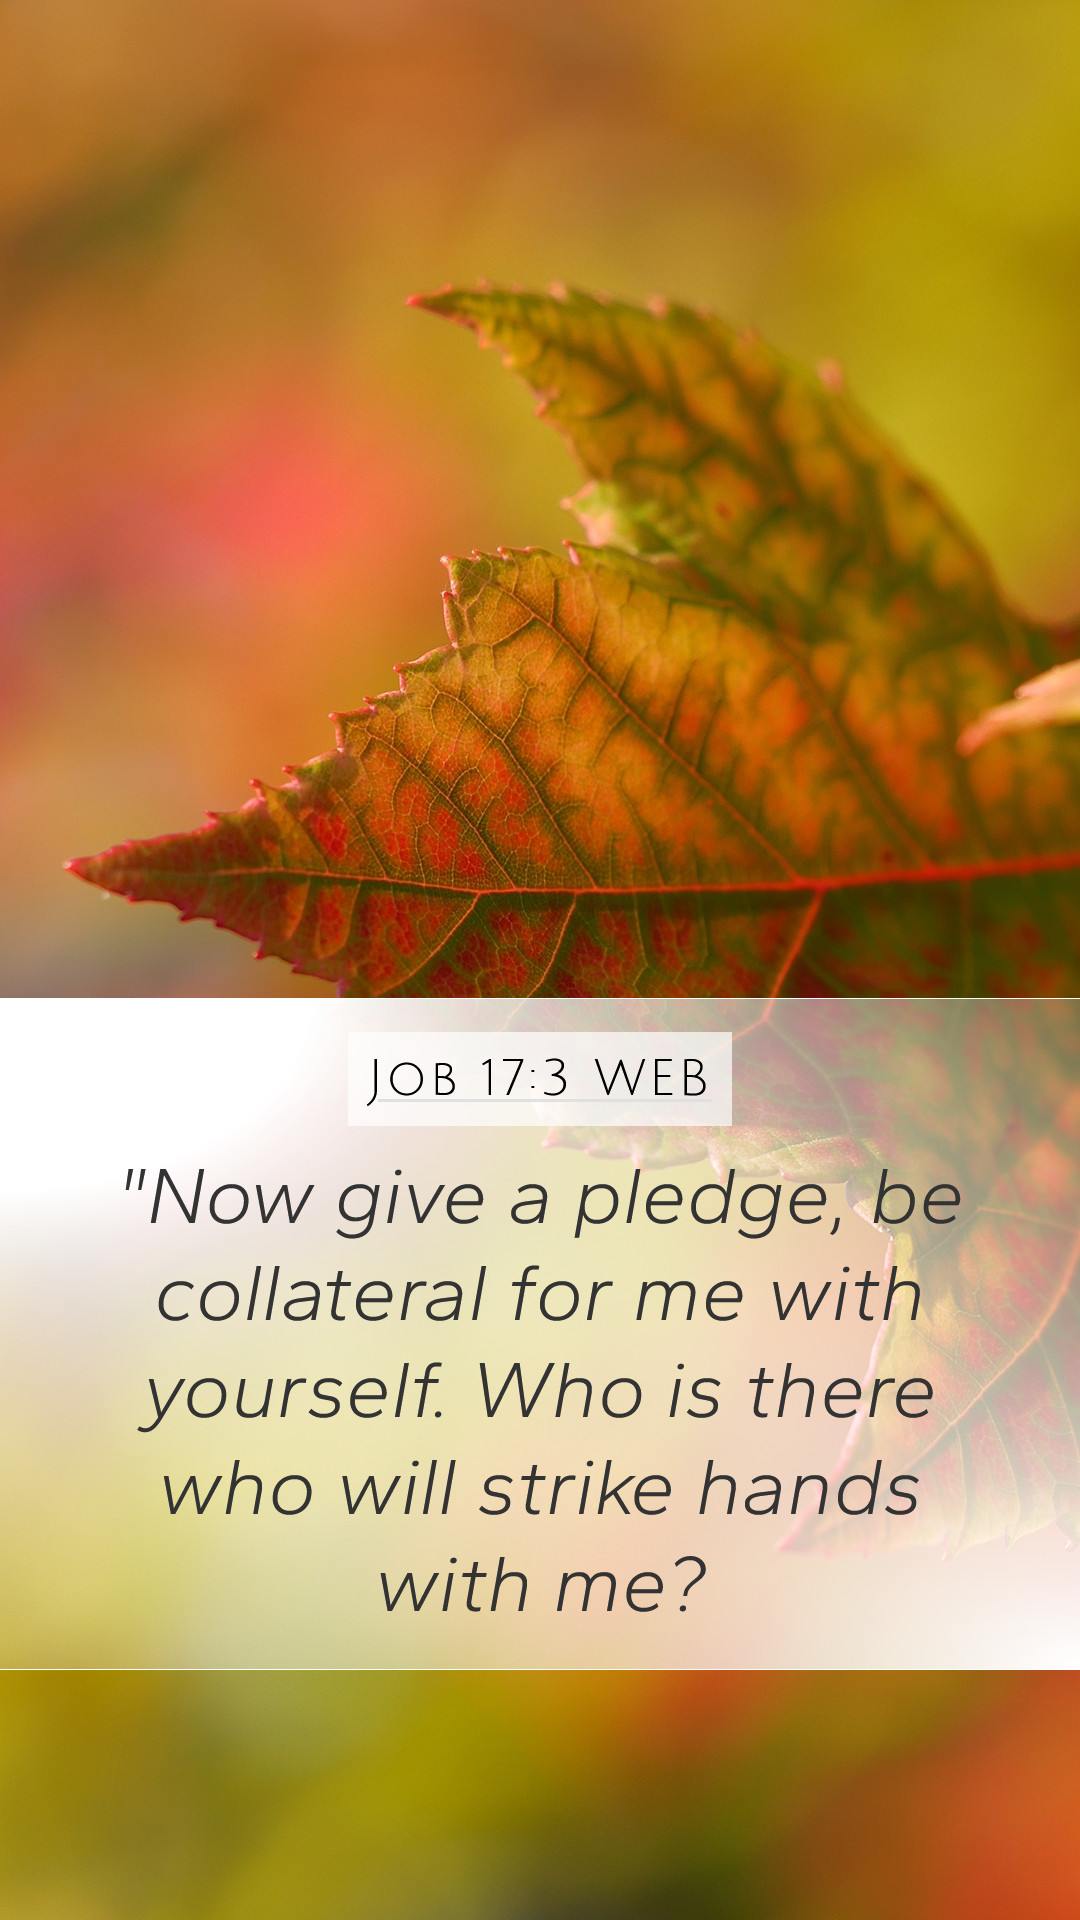 Job 17:3 WEB Mobile Phone Wallpaper give a pledge, be collateral for me with